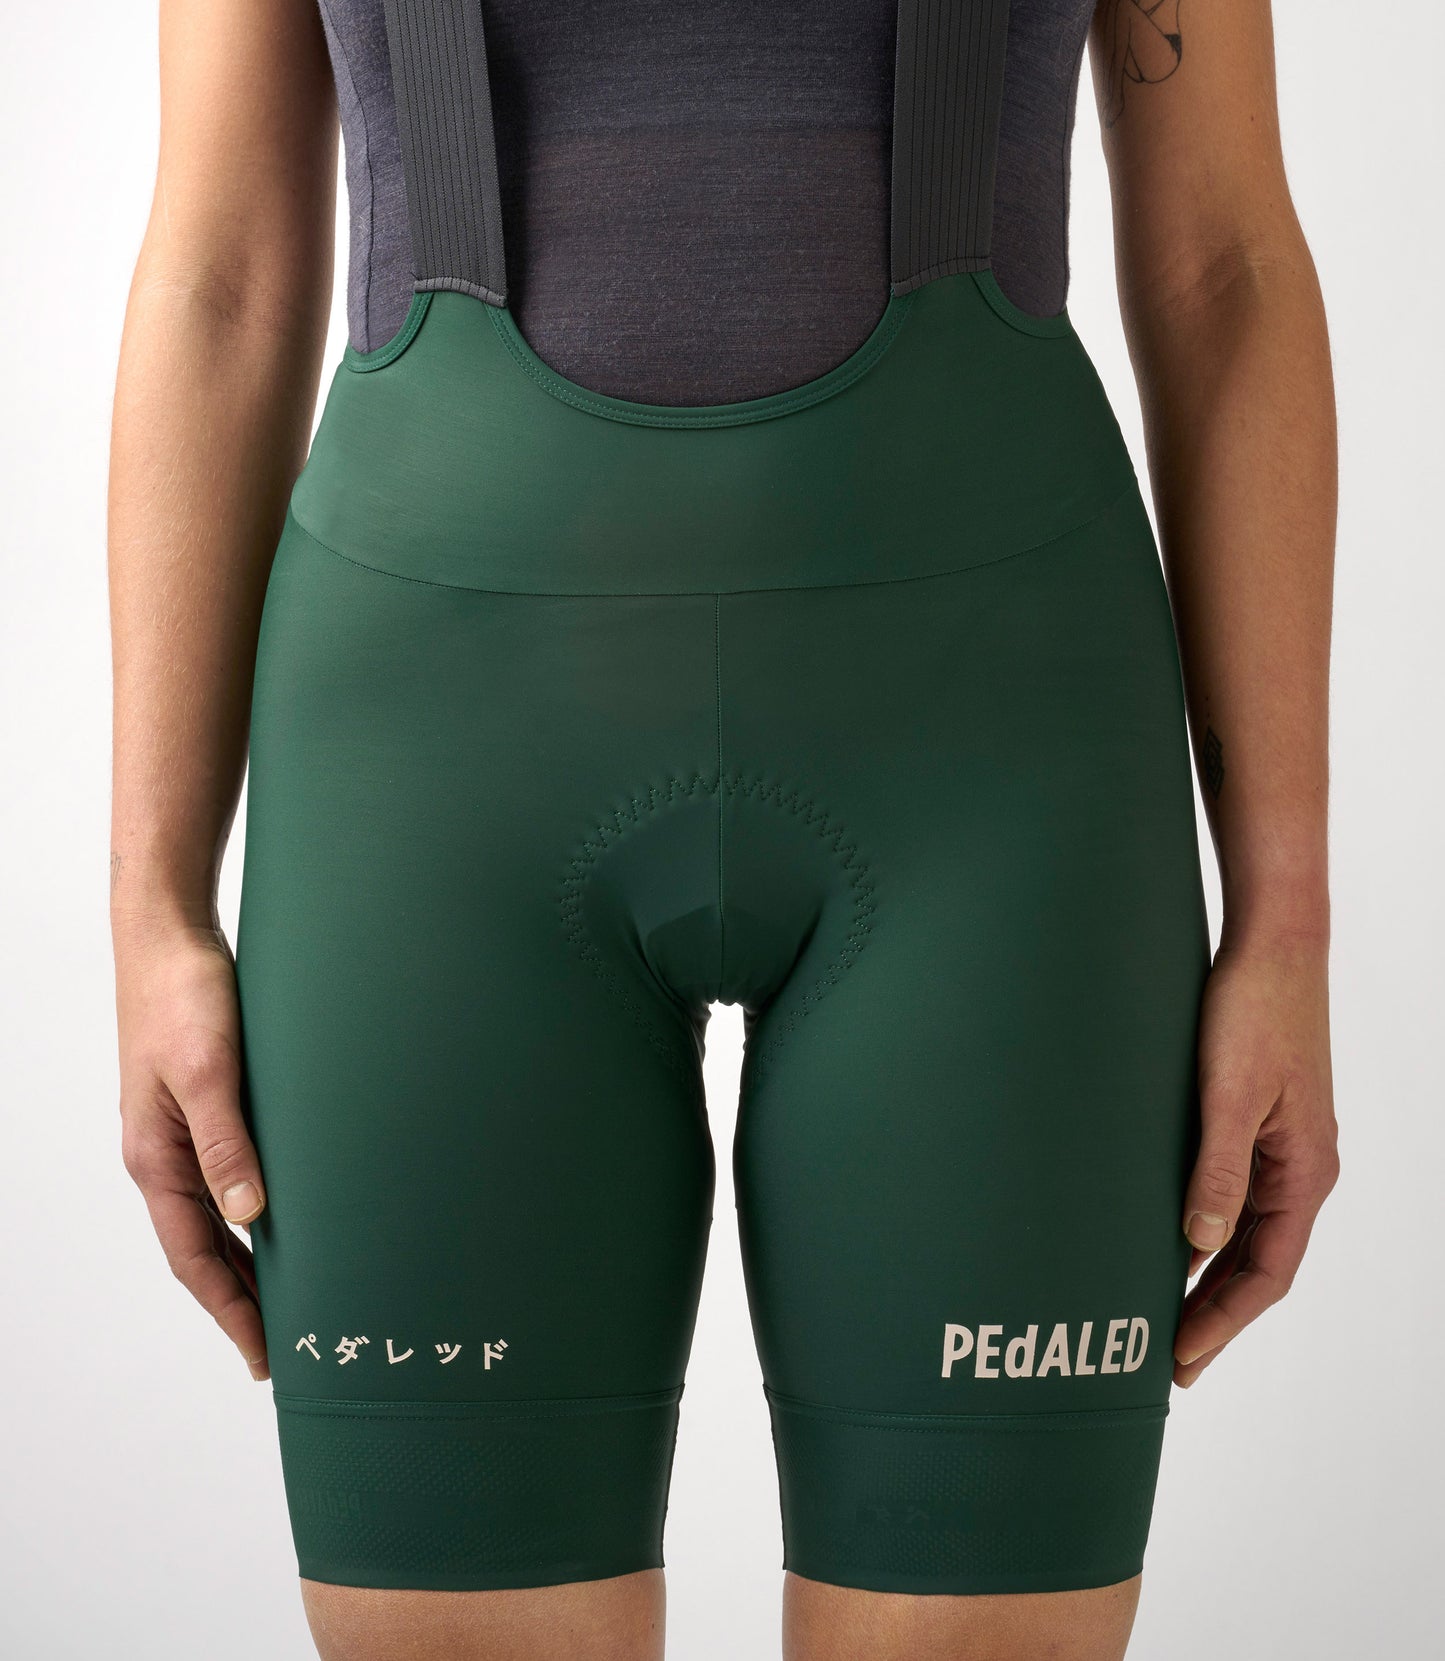 W3SBBES78PE_3_essential cycling bibshorts women green front logo pedaled